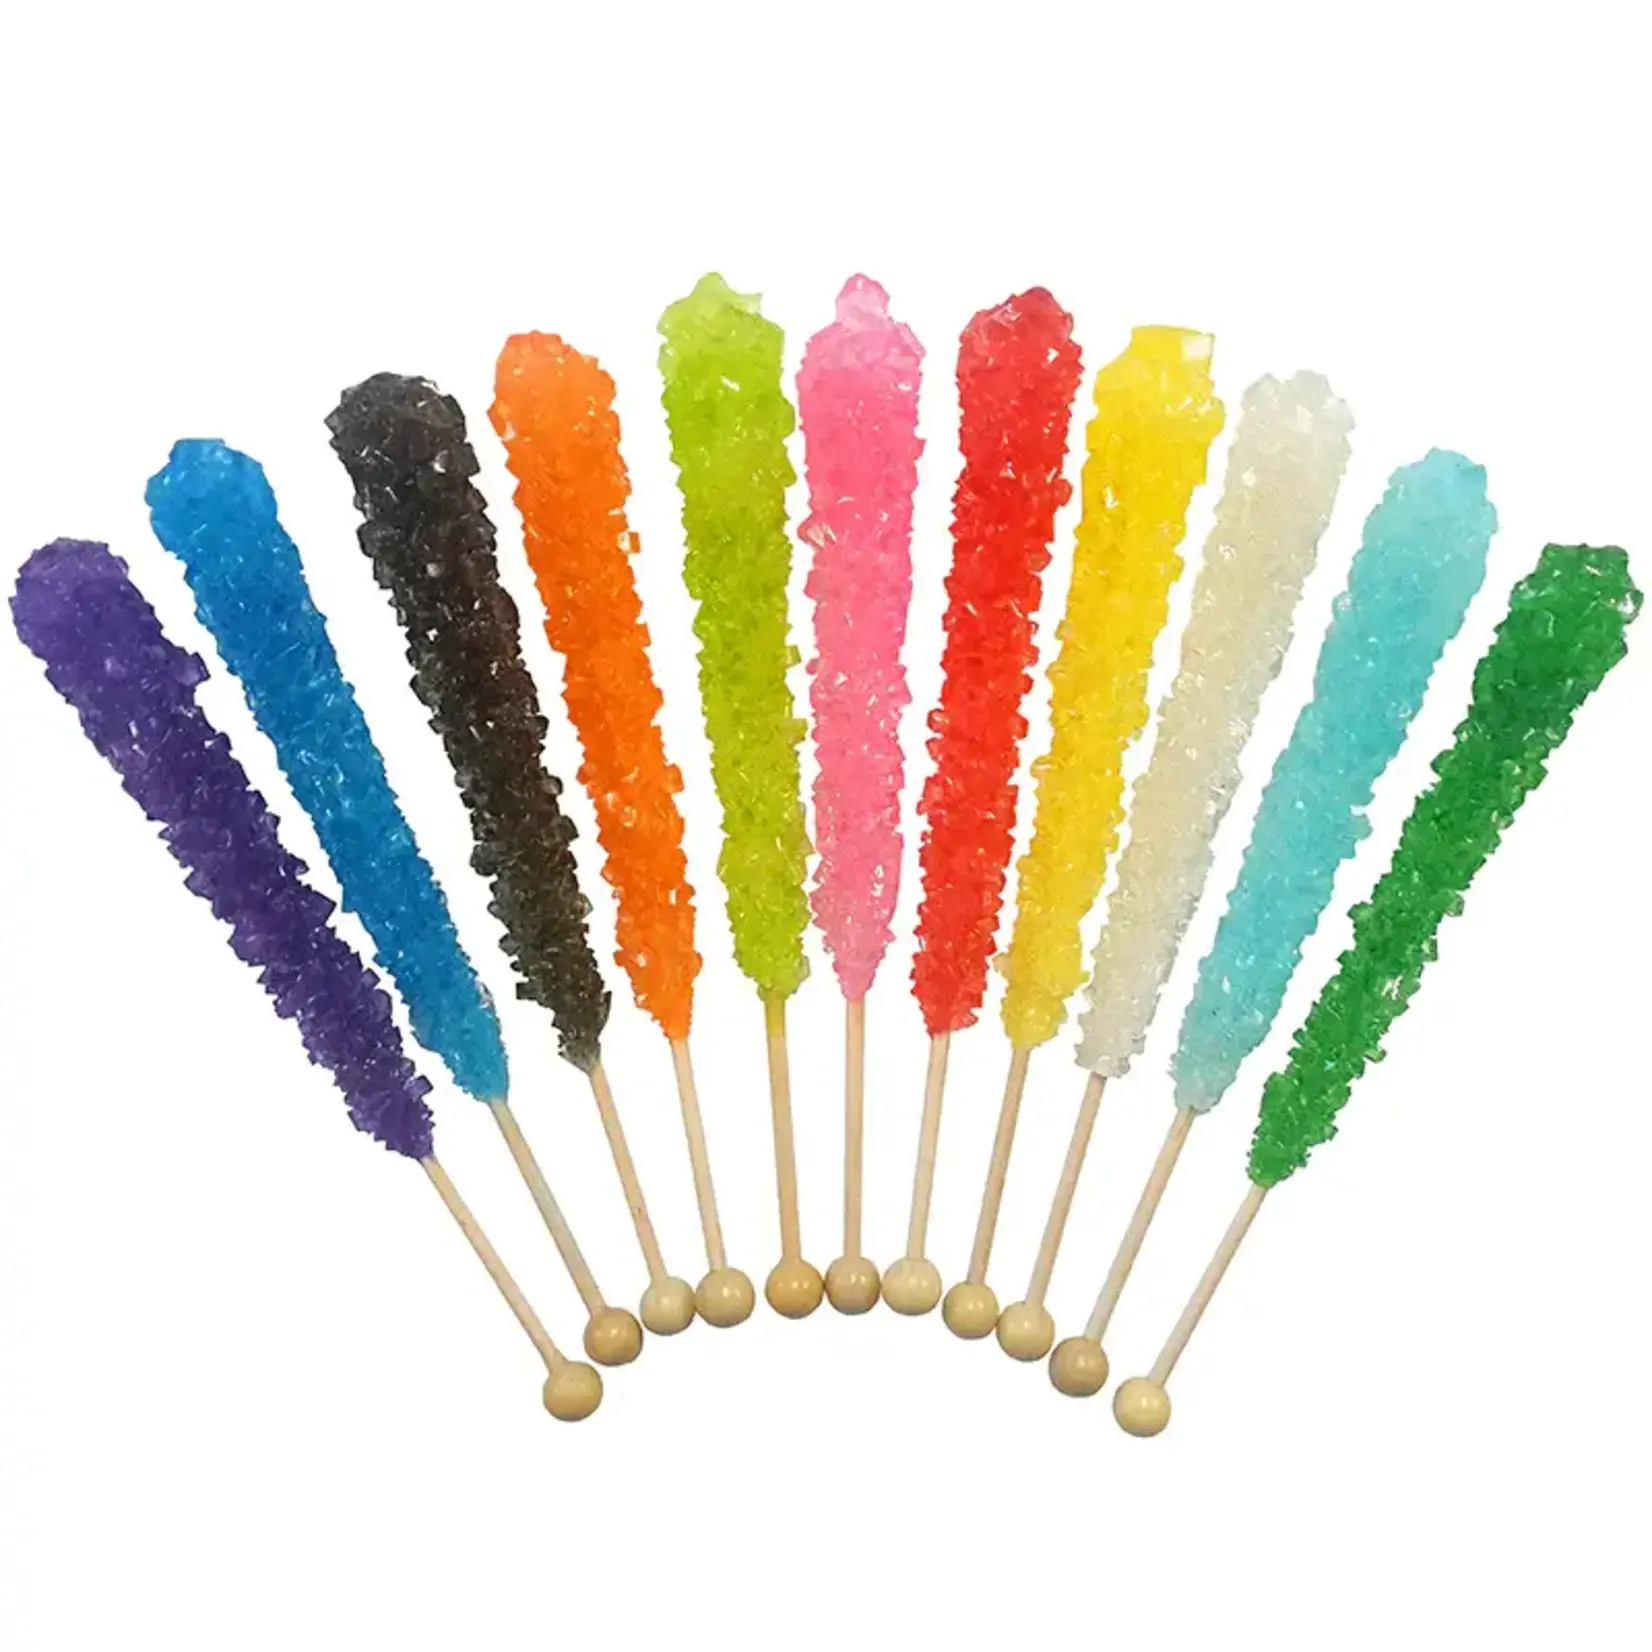 Candy Rock Candy on a Stick - 0.8oz Stick Assorted